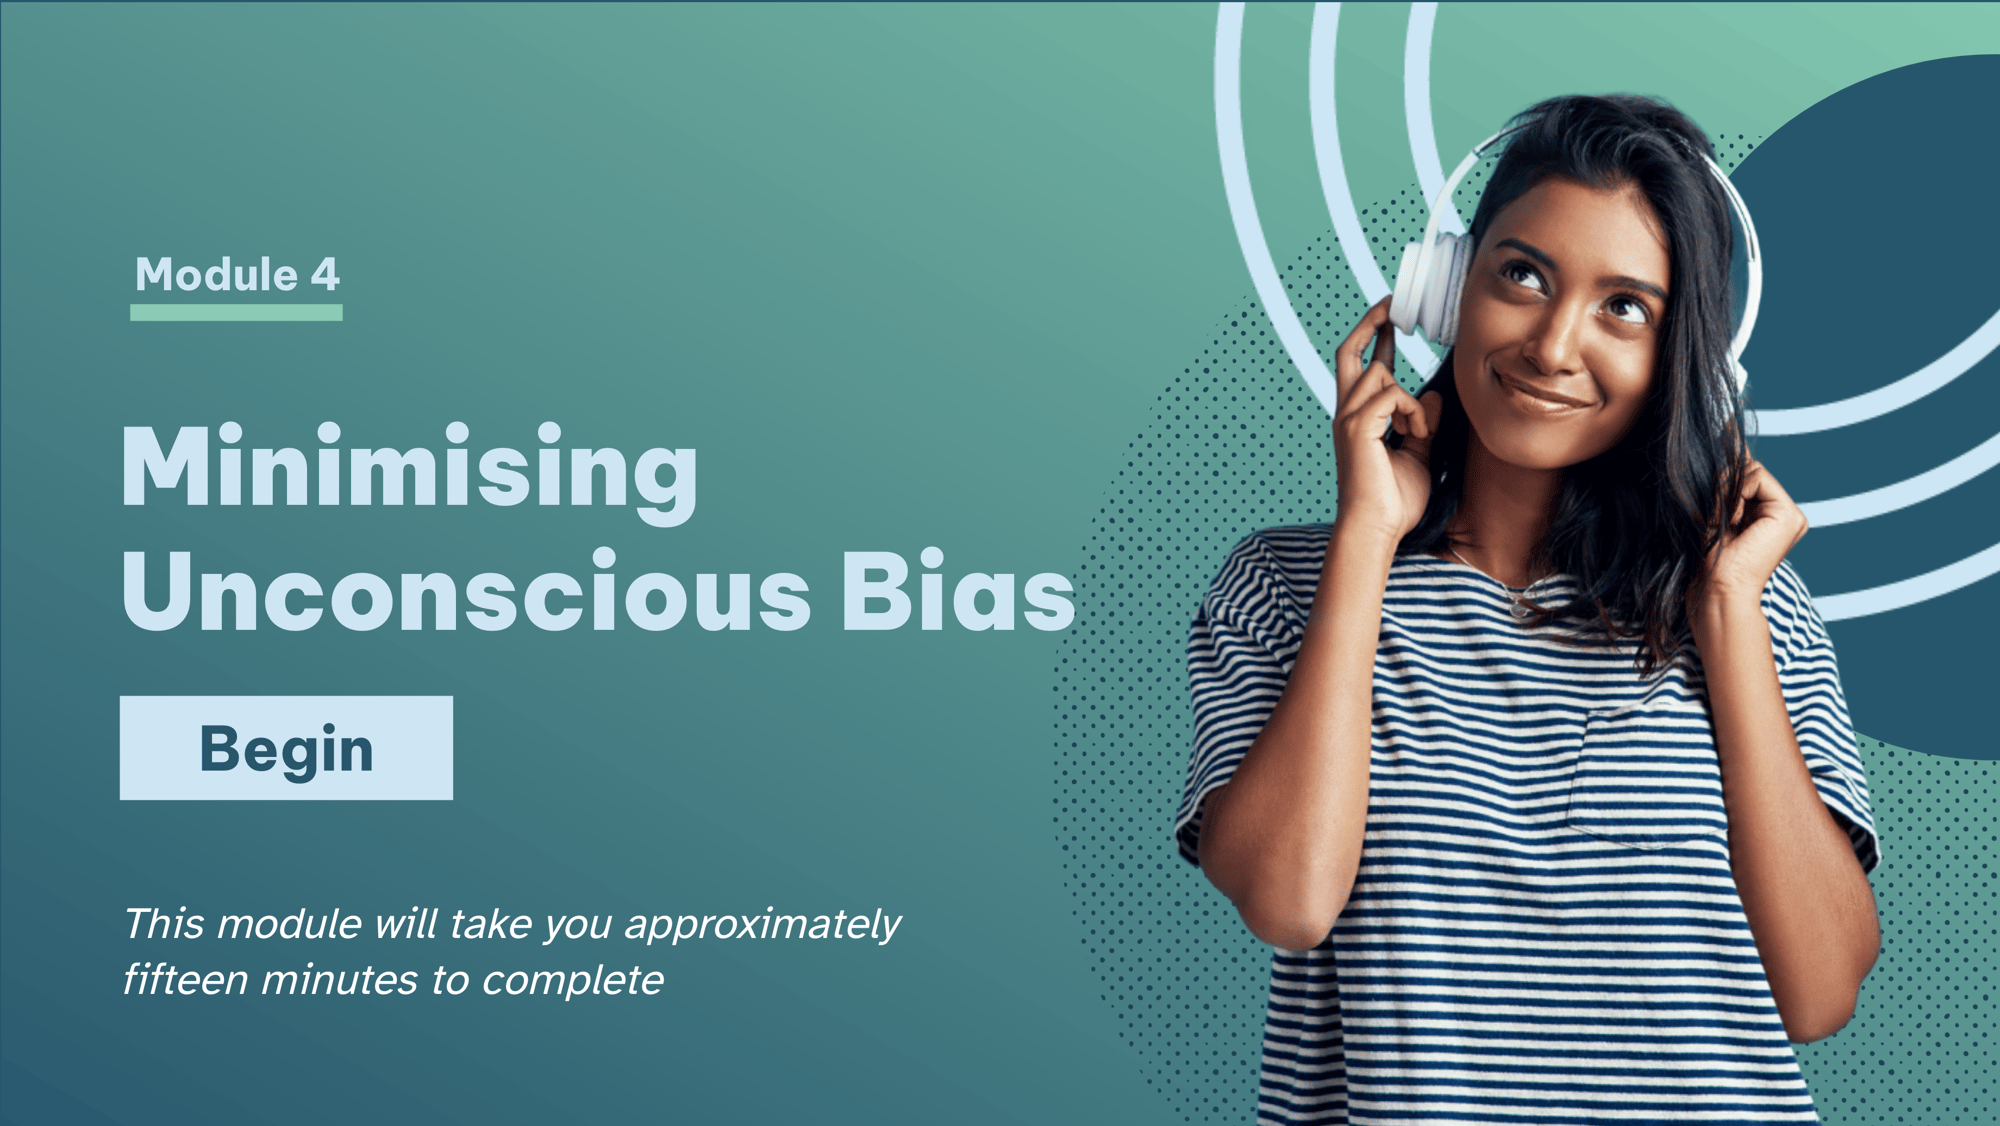 Module 4. Minimising unconscious bias. An young indian woman with headphones on her head.